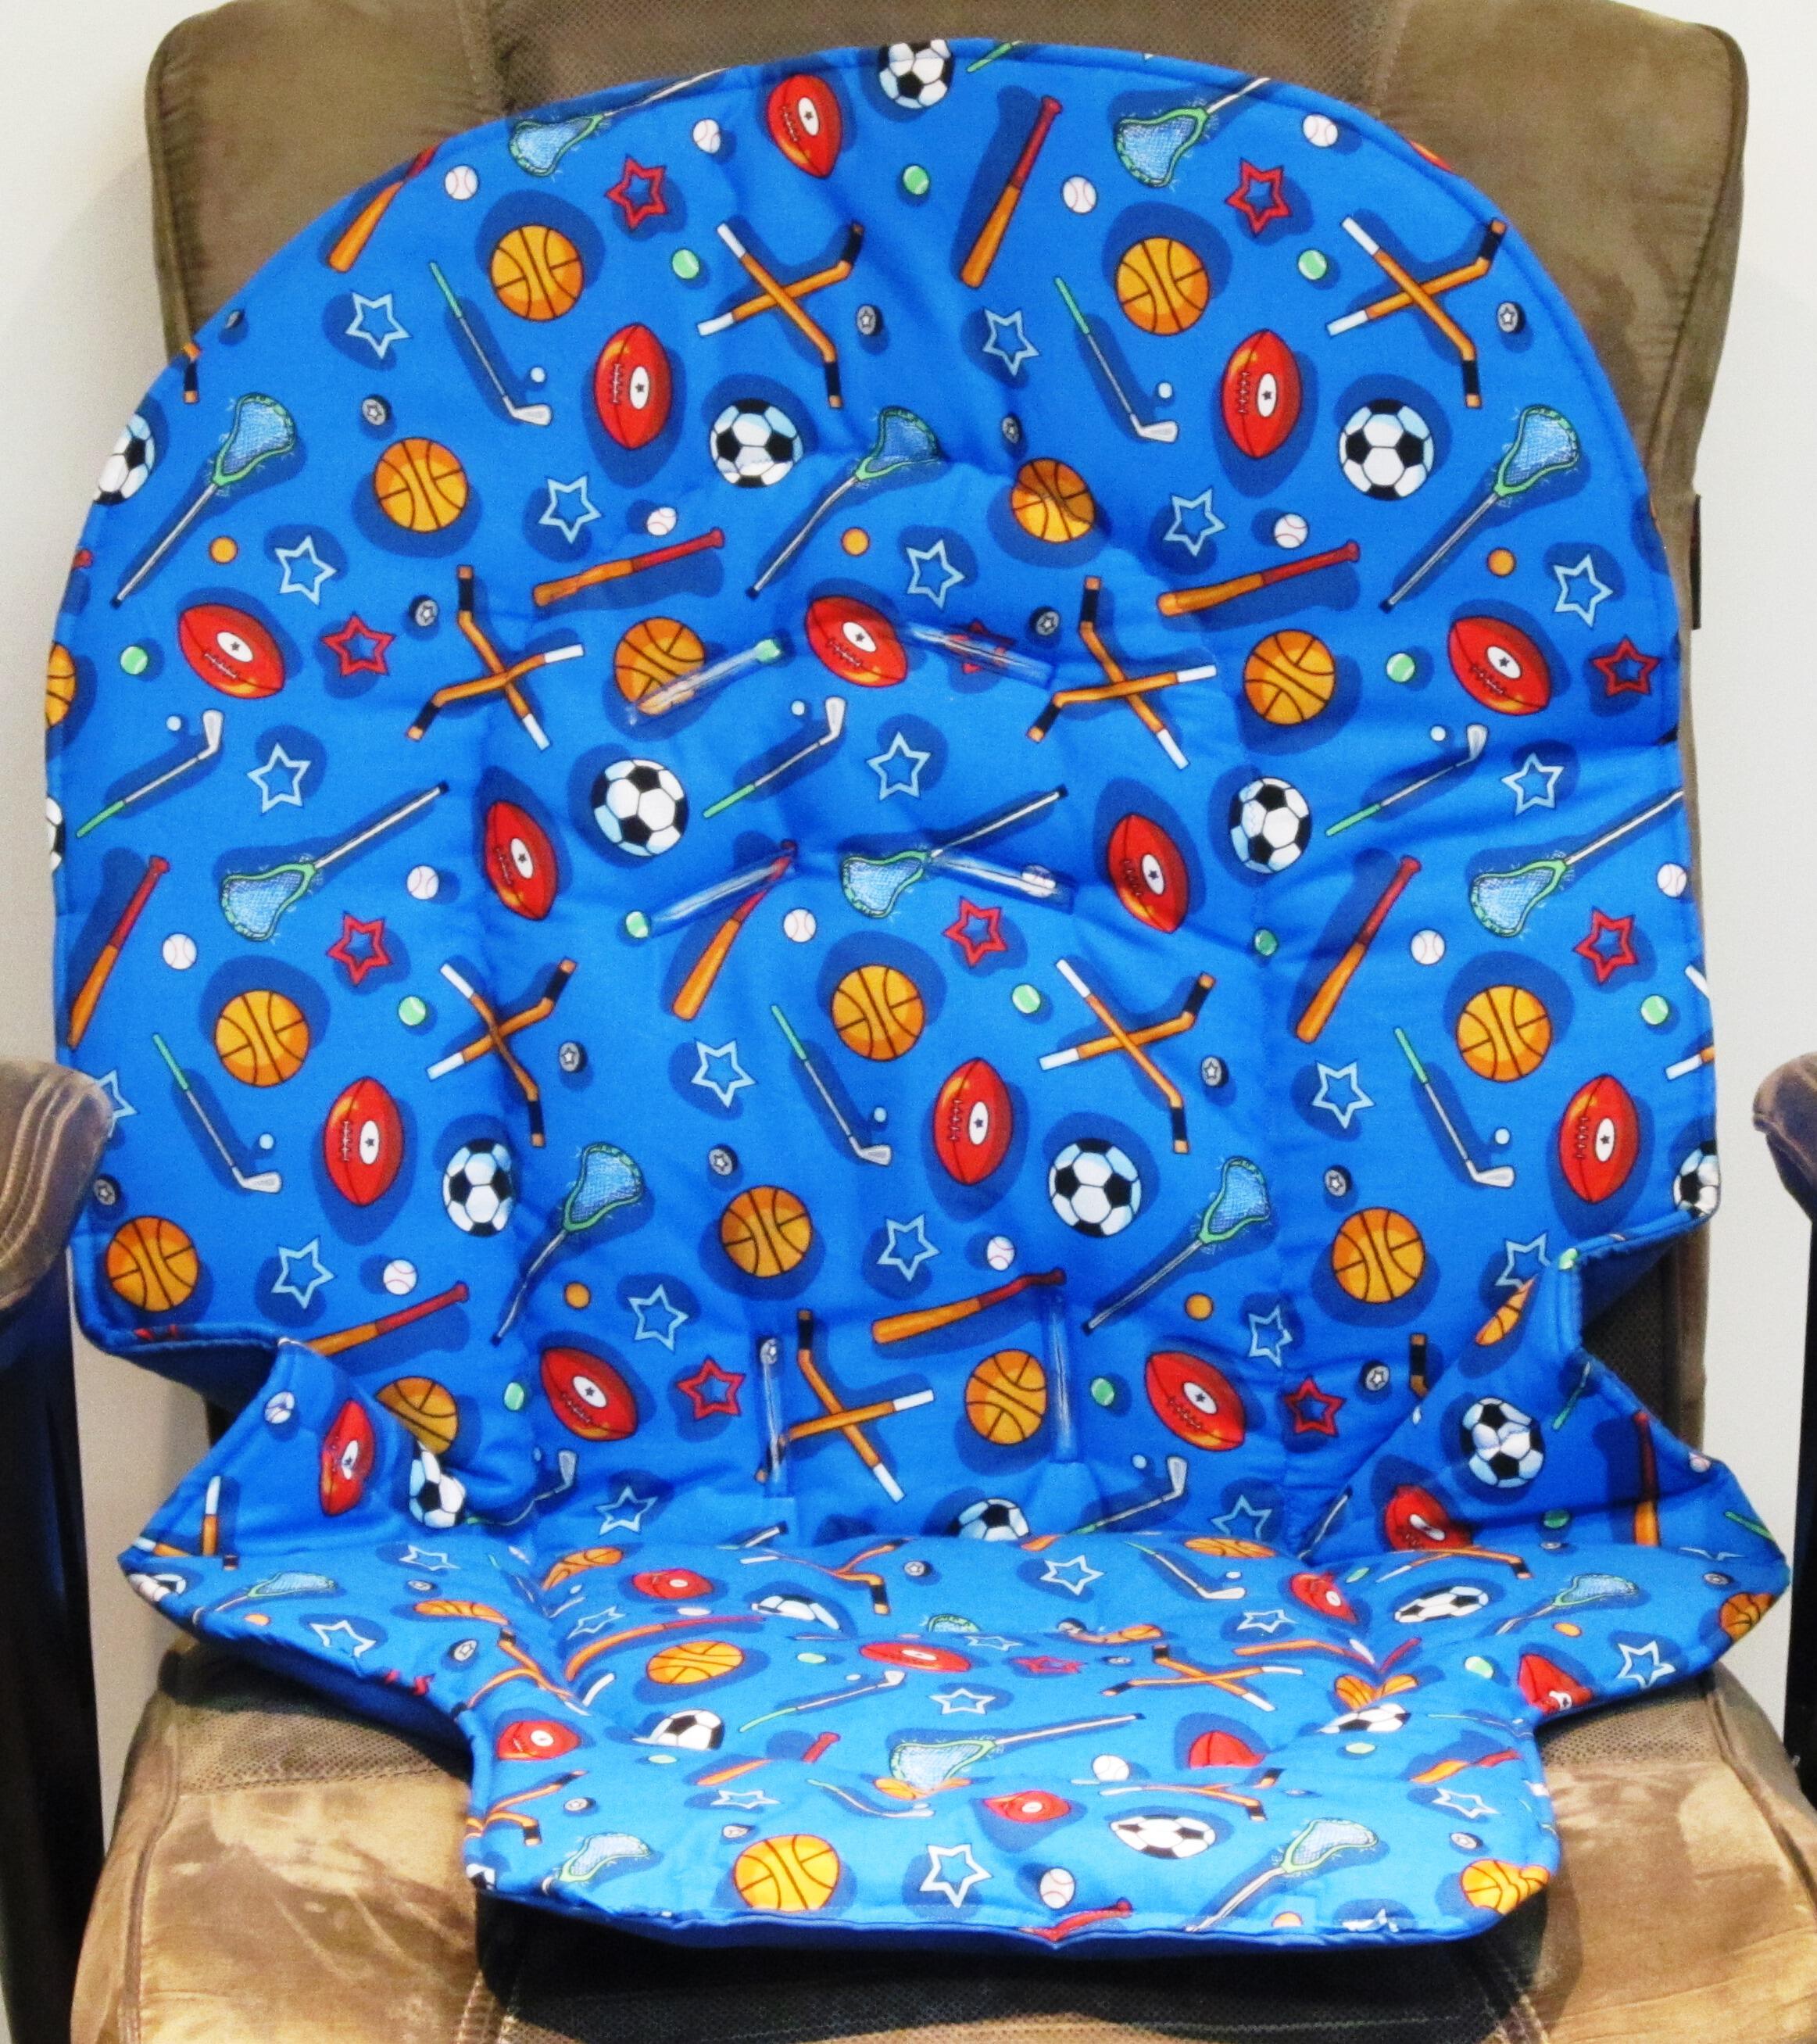 highchair cushion for Graco Duodiner older model or Blossom, replacement pad, all sport, handmade in the USA